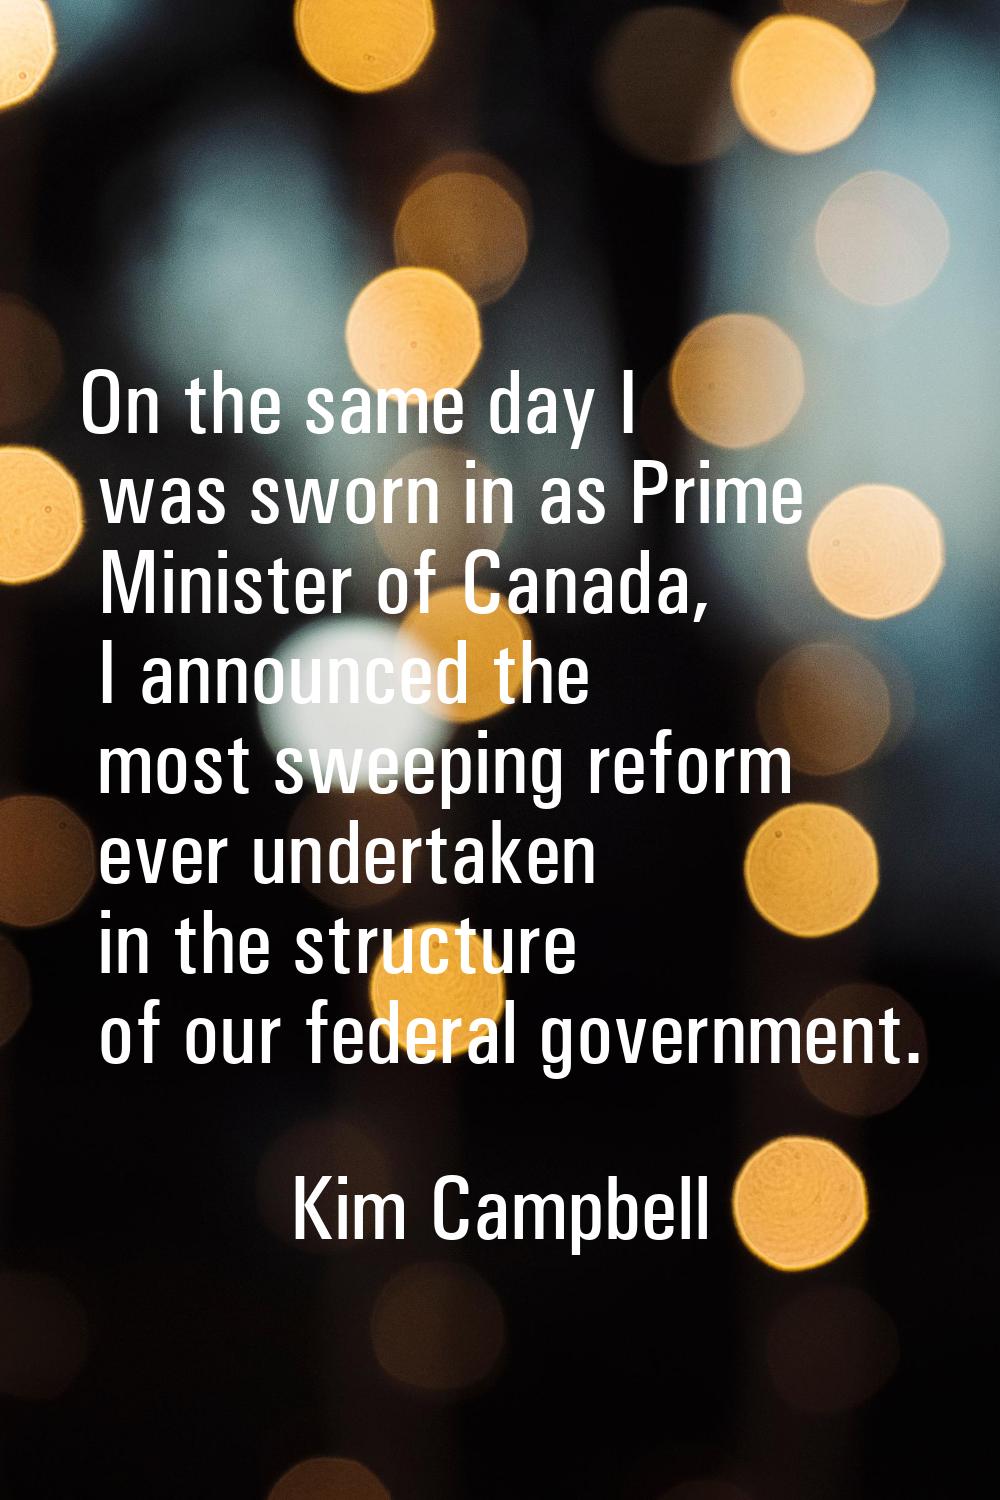 On the same day I was sworn in as Prime Minister of Canada, I announced the most sweeping reform ev